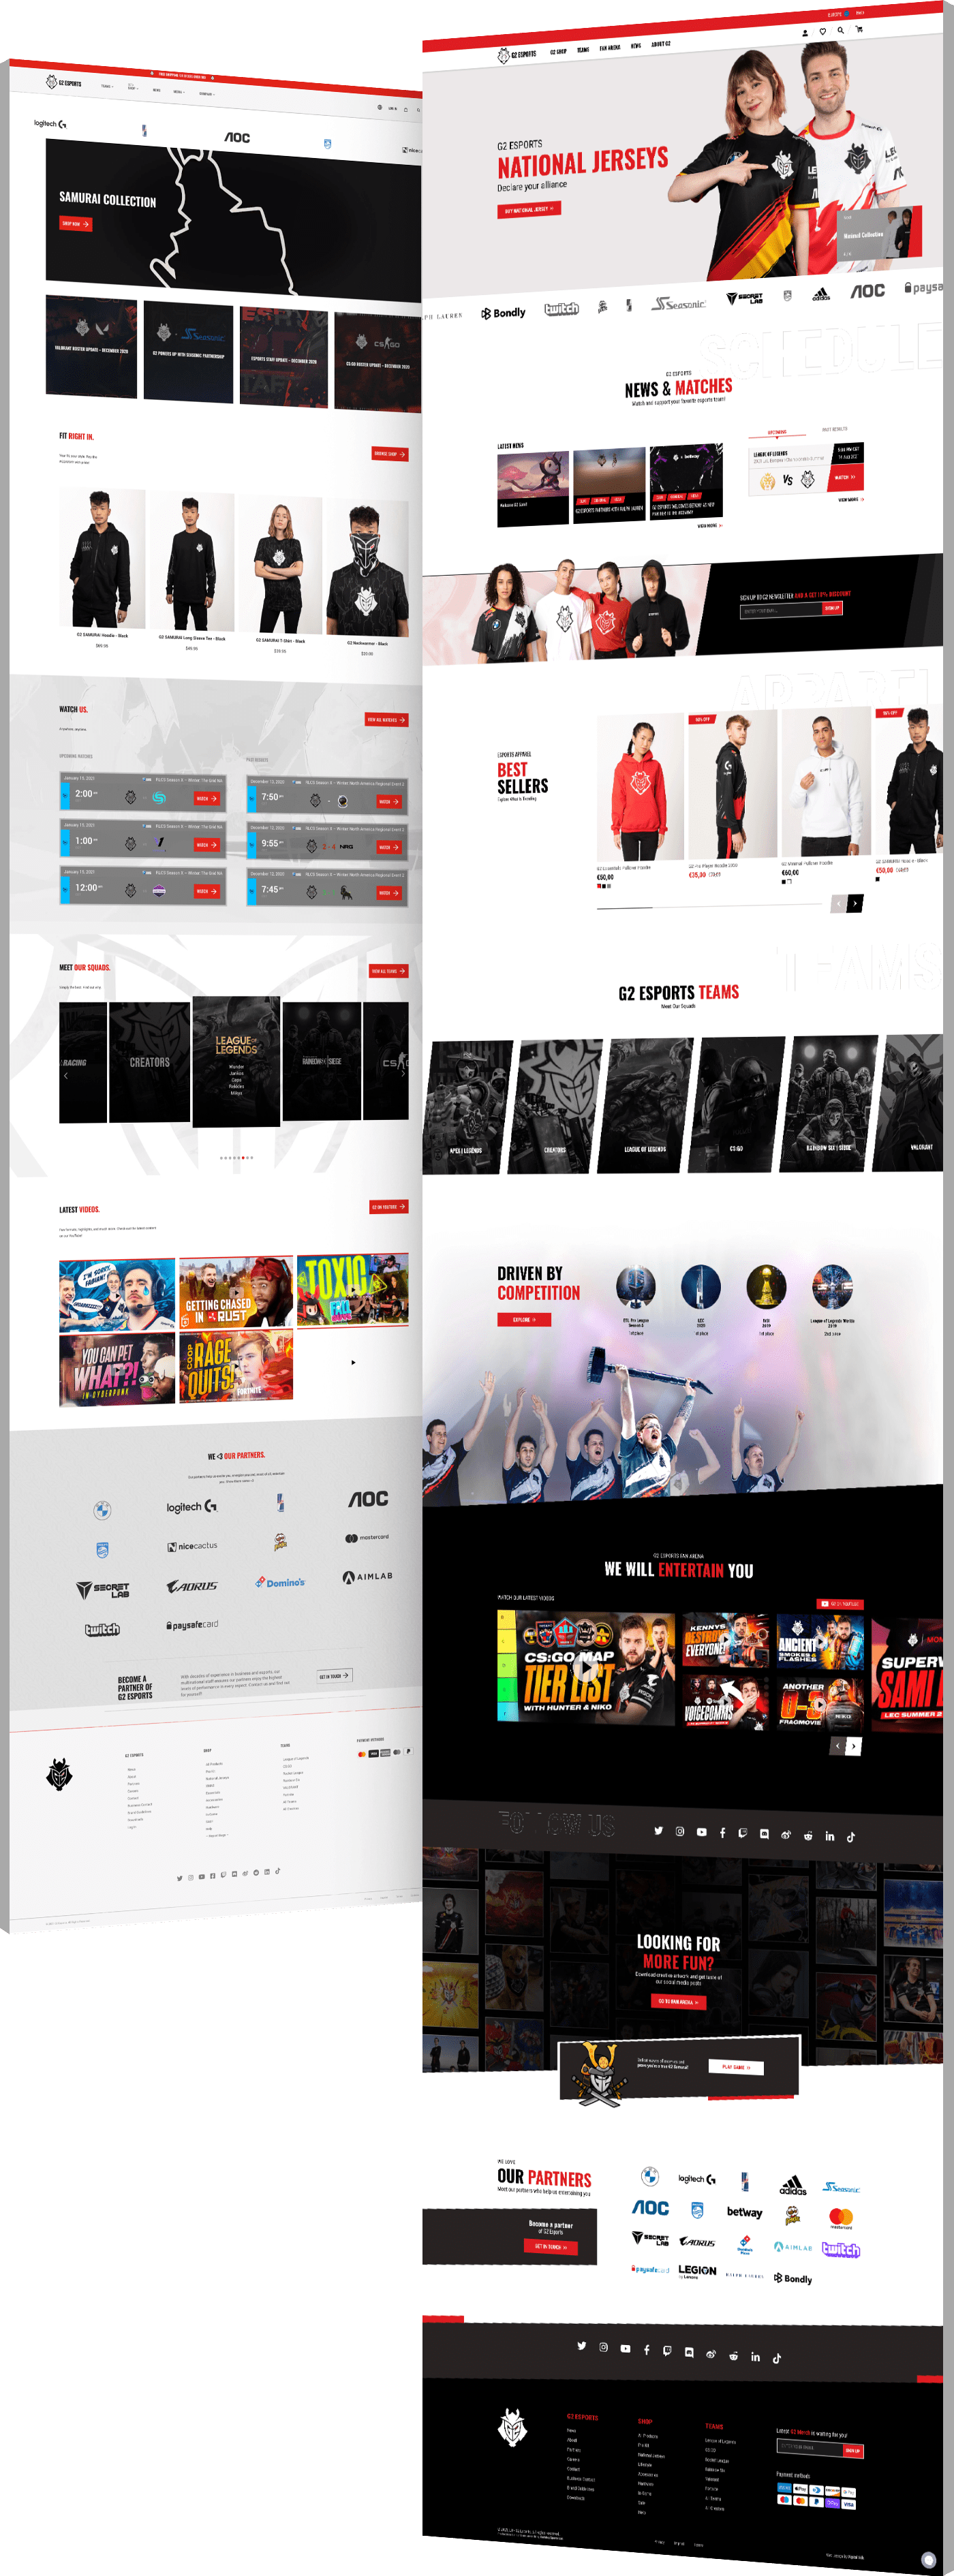 Web design before and after photos of G2 Esports website